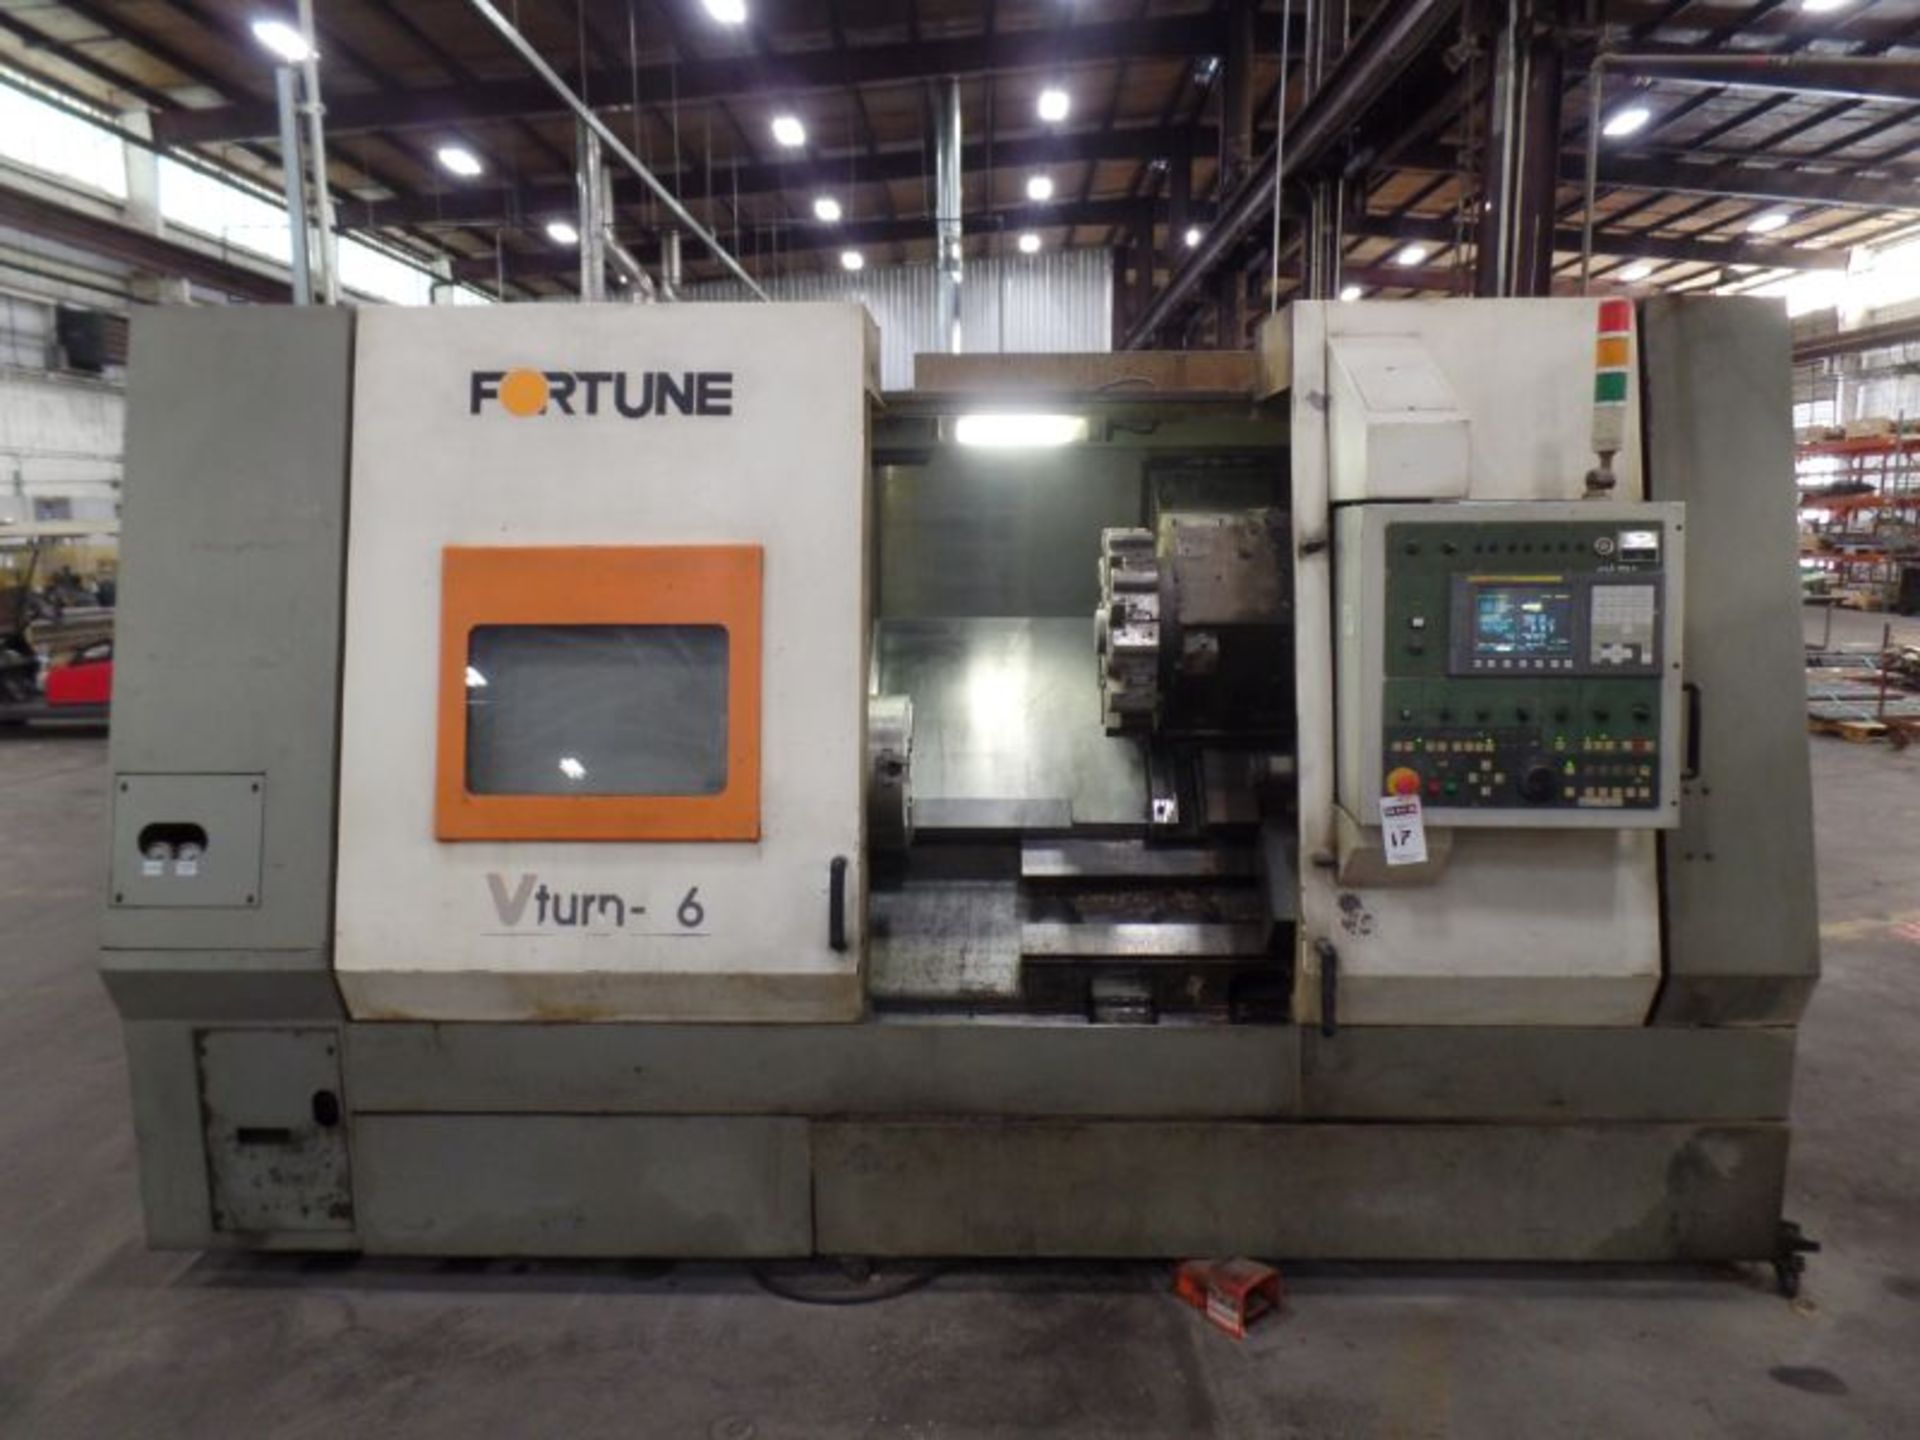 Fortune Vturn-36, Fanuc 0i-T, 25.6” SW, 21.7” Max. Turn Dia. x 51” Centers, 4.1” Spindle Bore, - Image 3 of 10